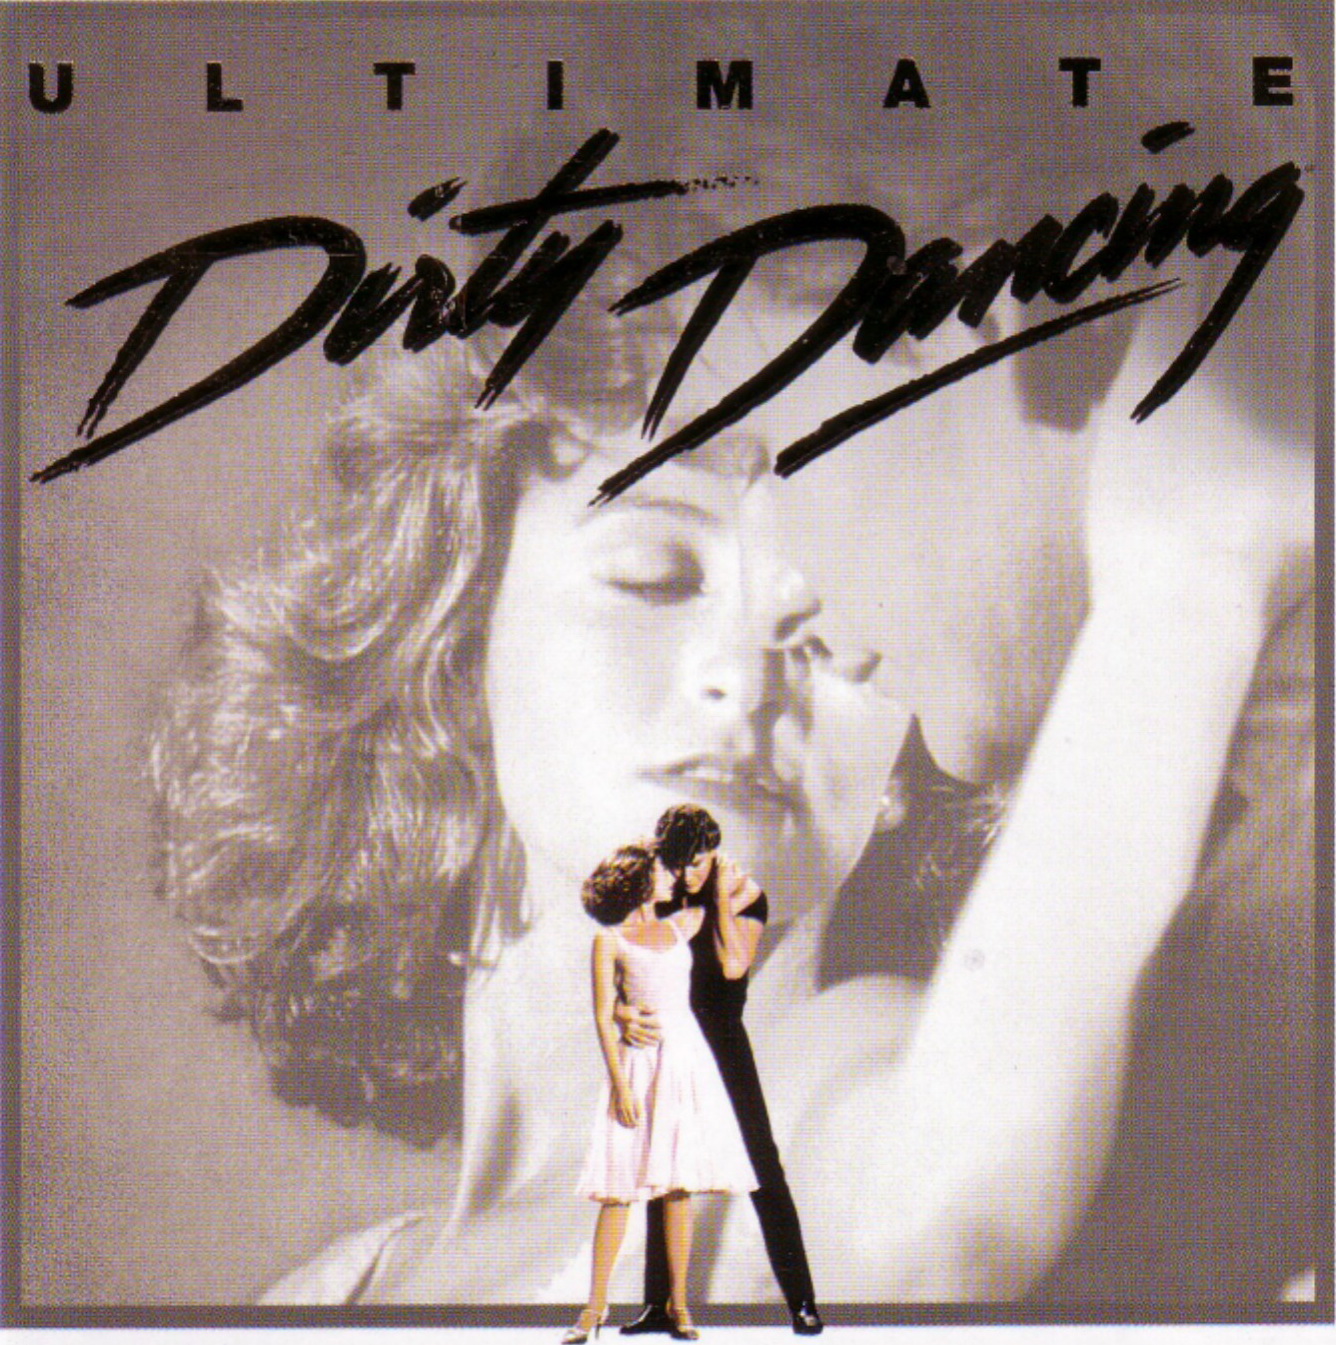 Dirty Dancing 1987 Music Soundtrack Complete List of